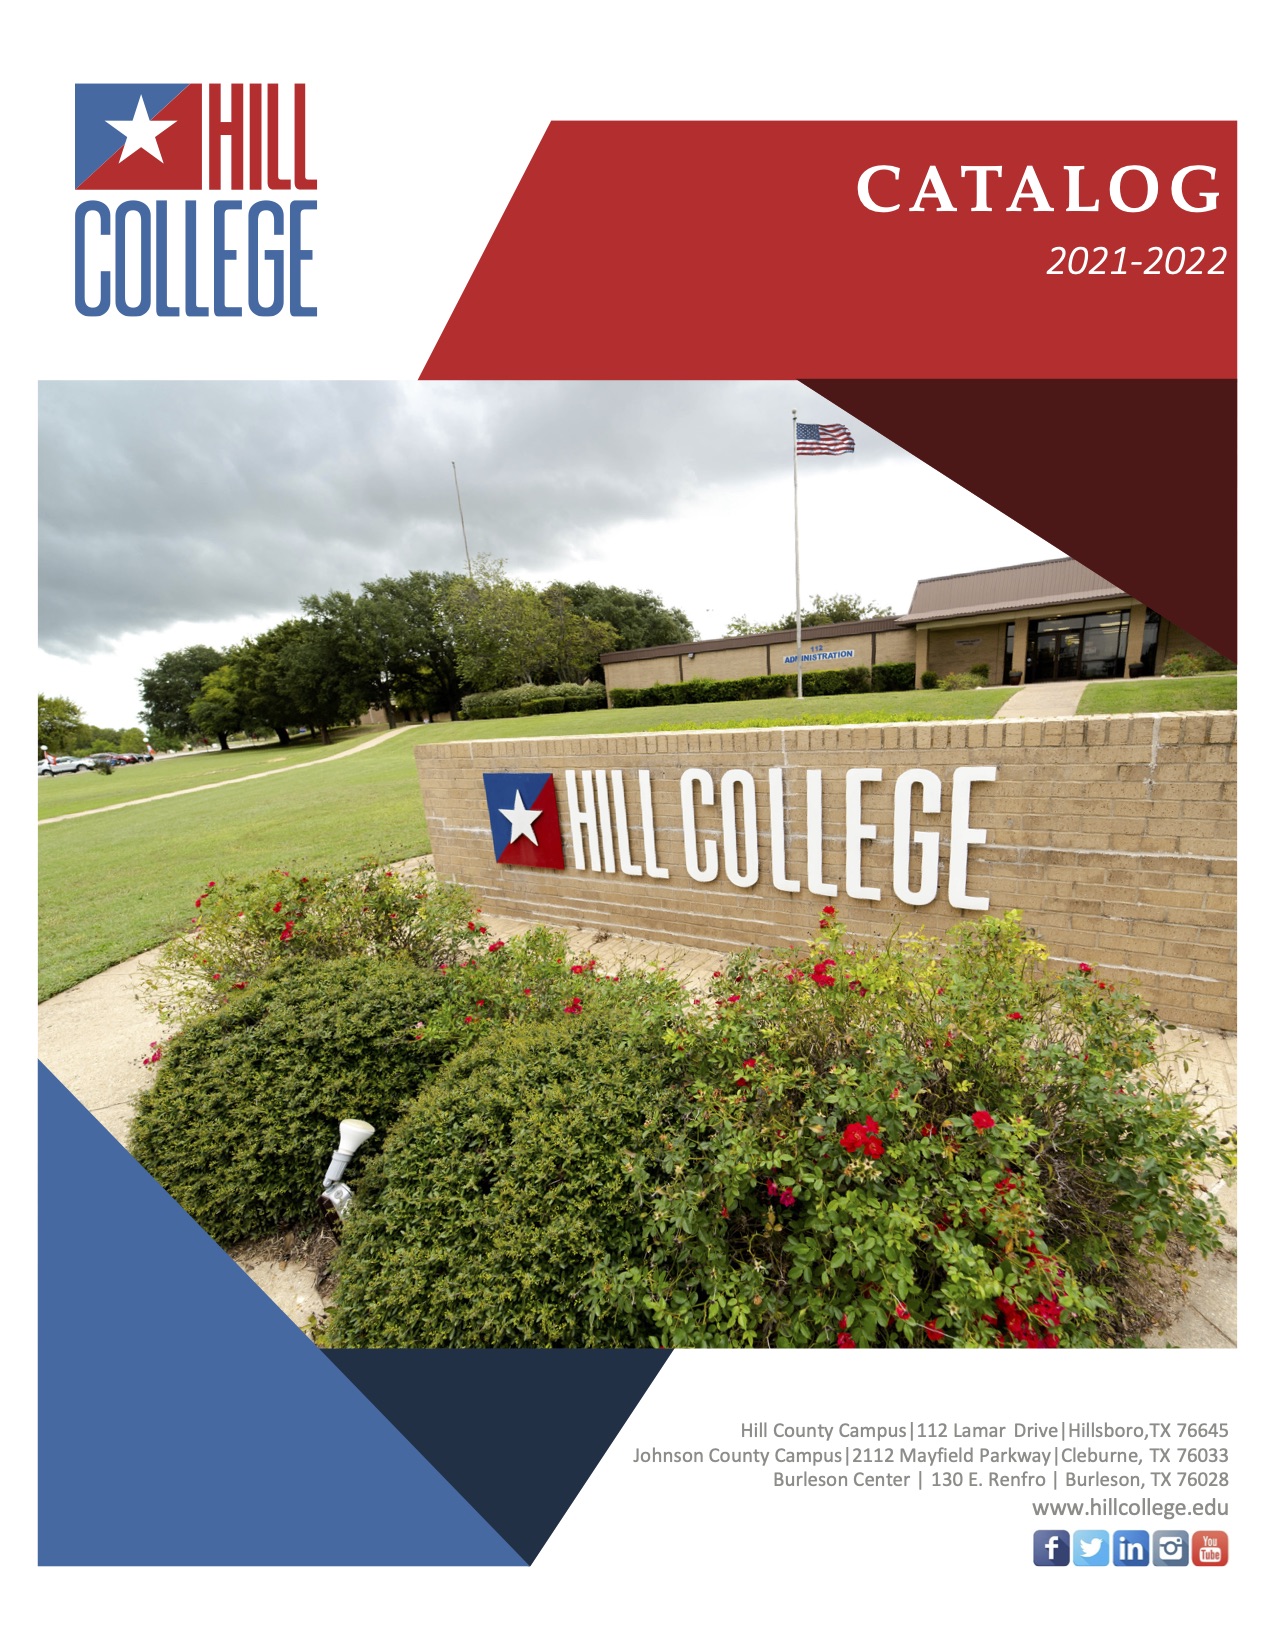 Hill College Campus Entrance Sign